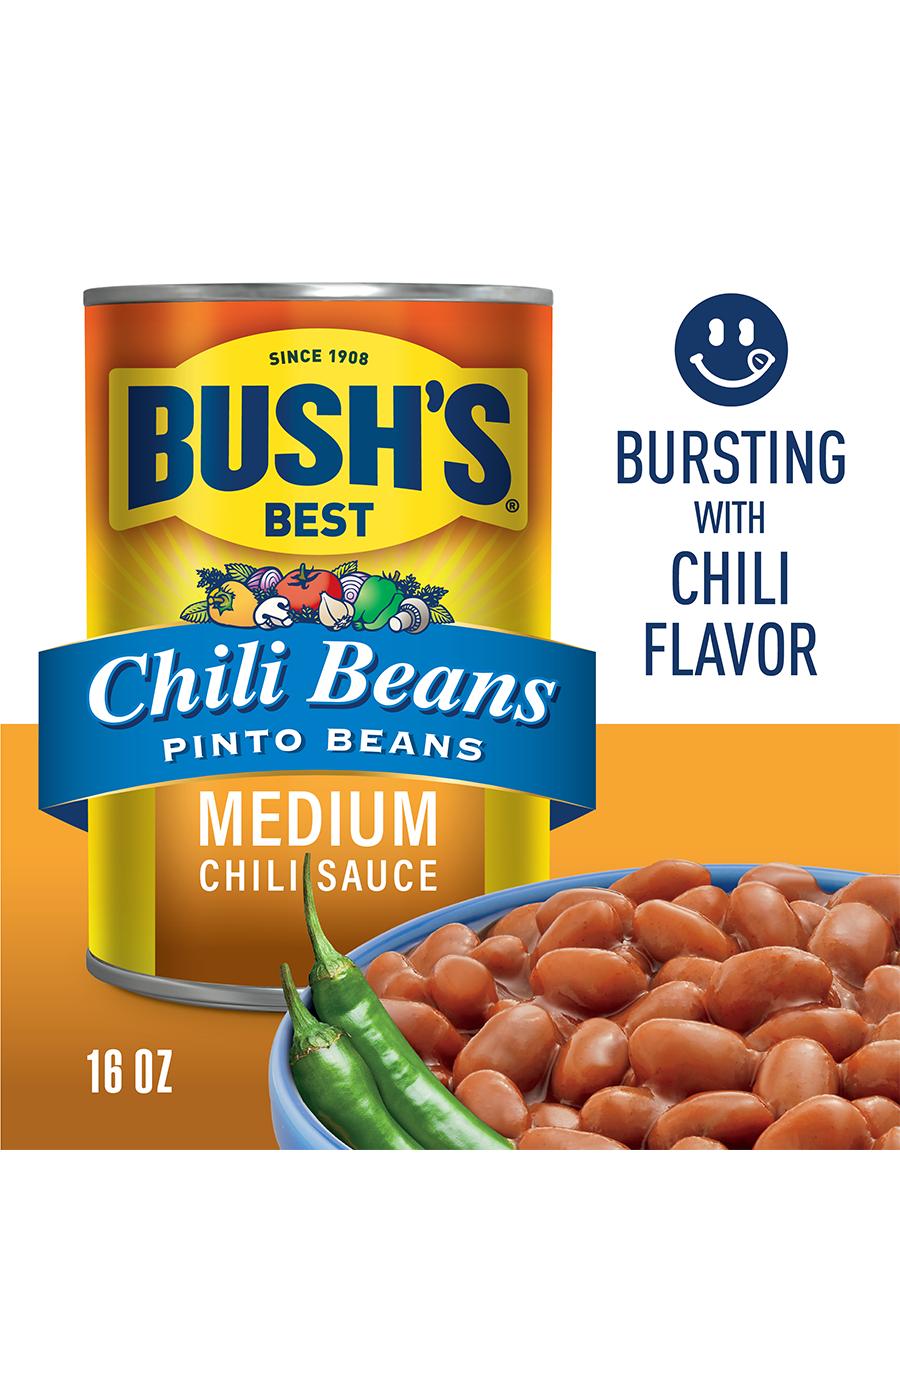 Bush's Best Pinto Beans in a Medium Chili Sauce; image 2 of 5